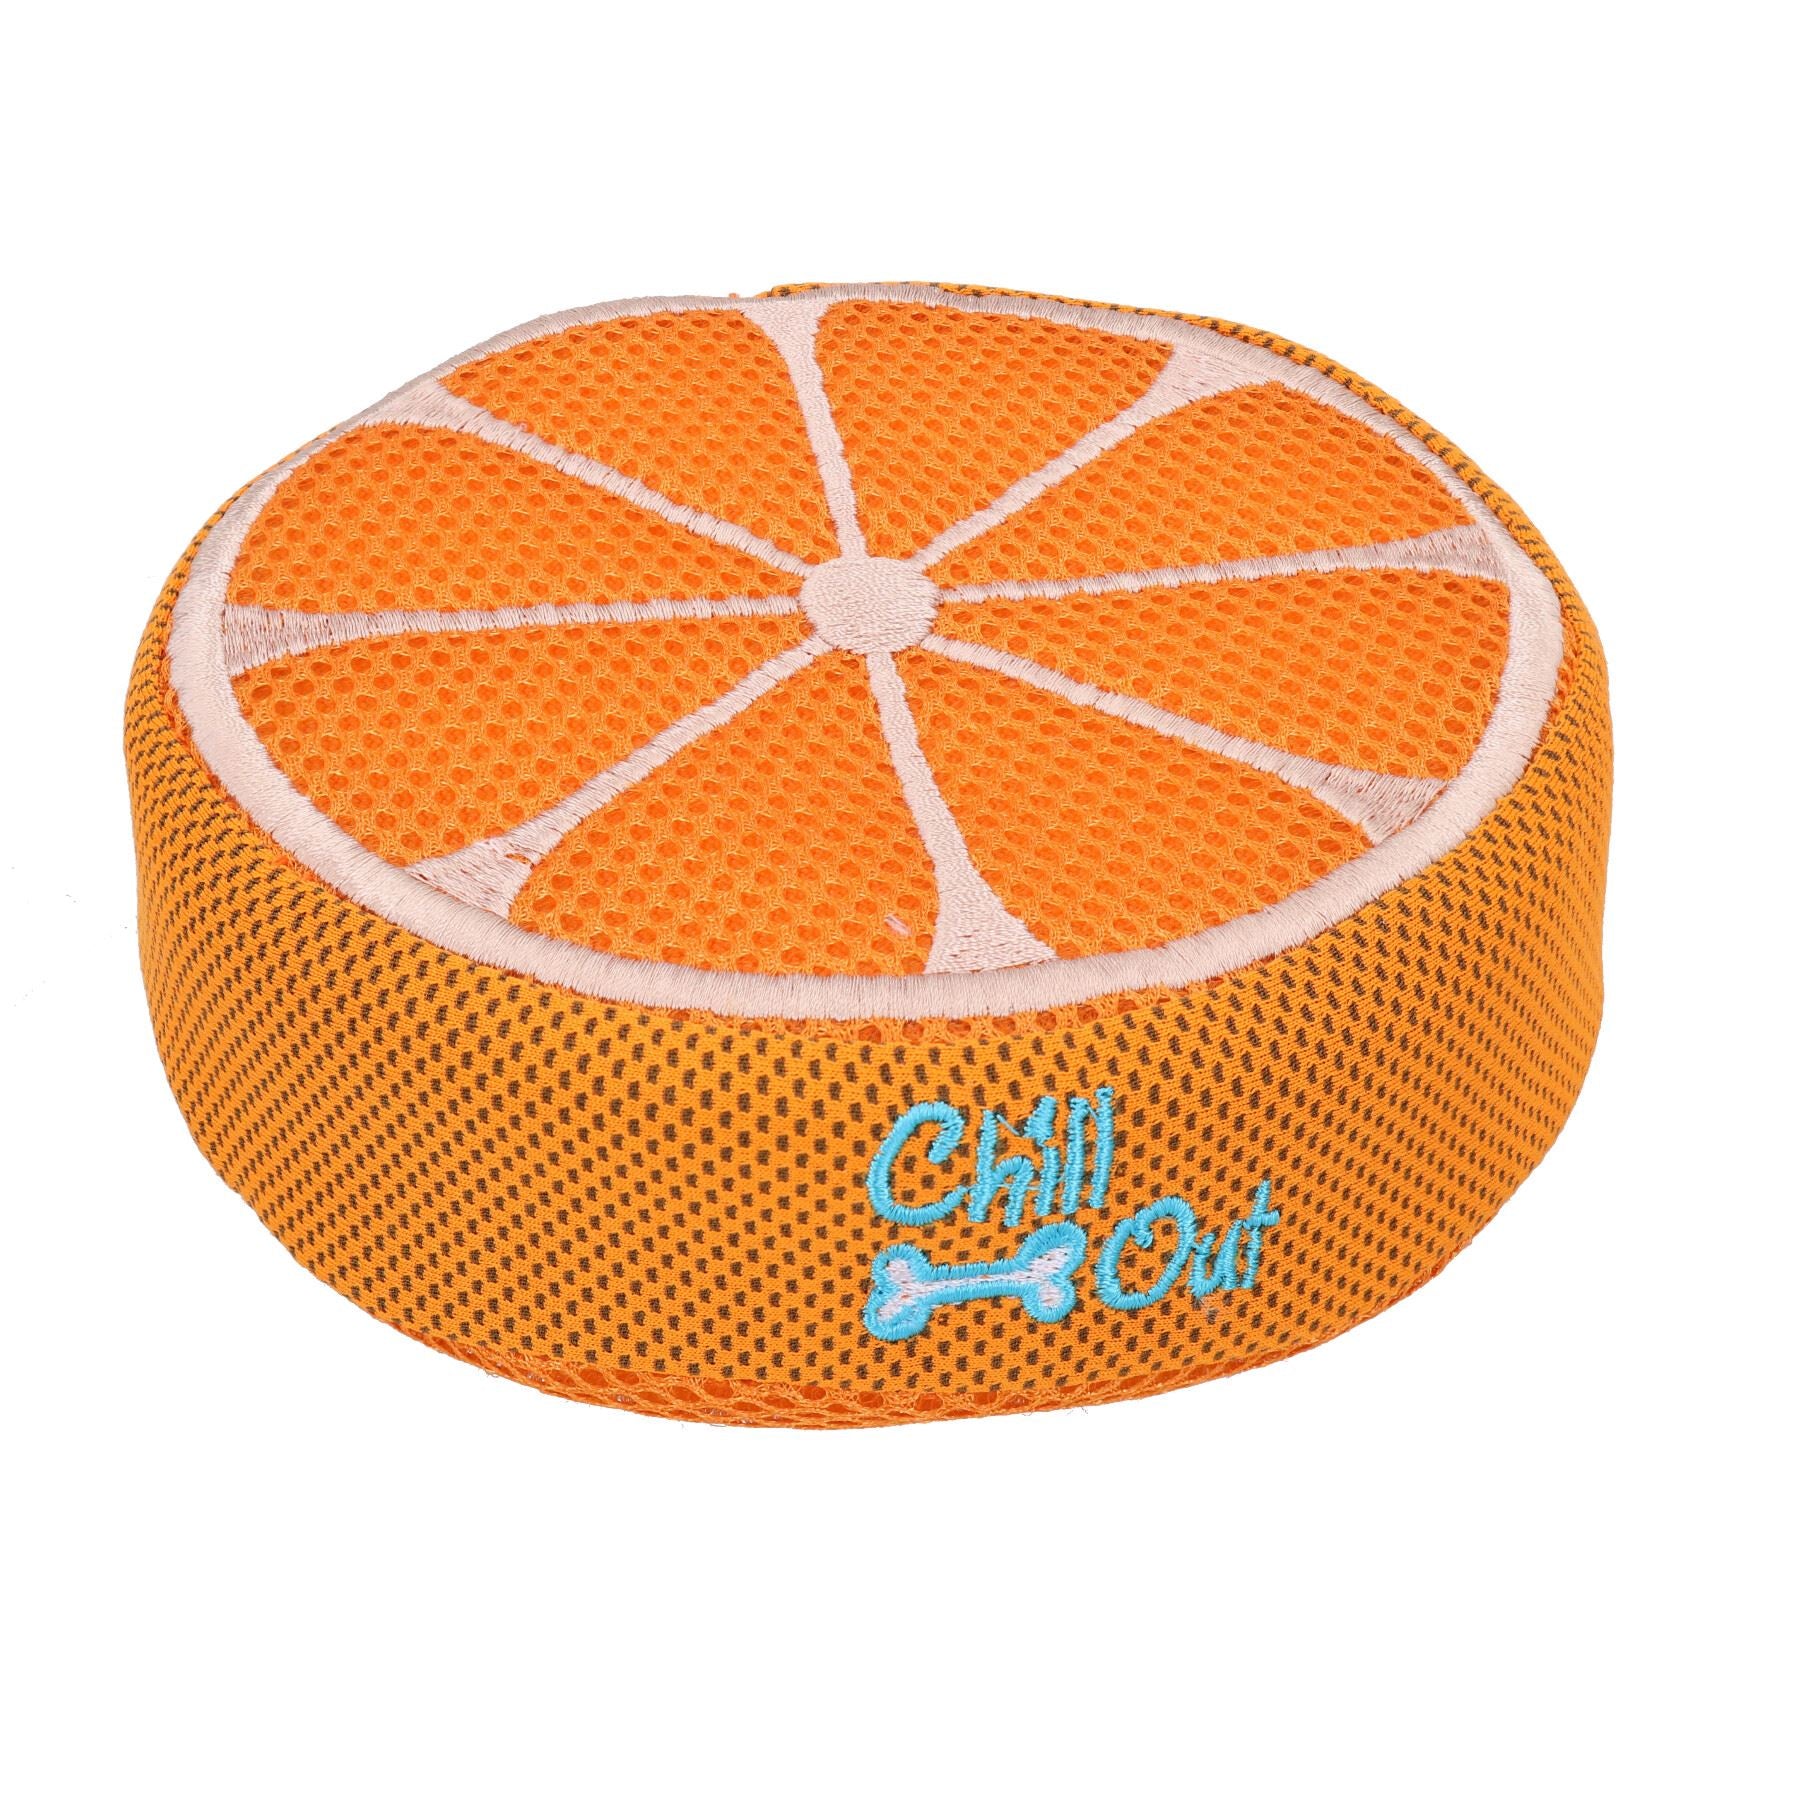 Orange Chillout Cool Dog Puppy Heat Relief Toy Summer Heat Fruit Toy Game